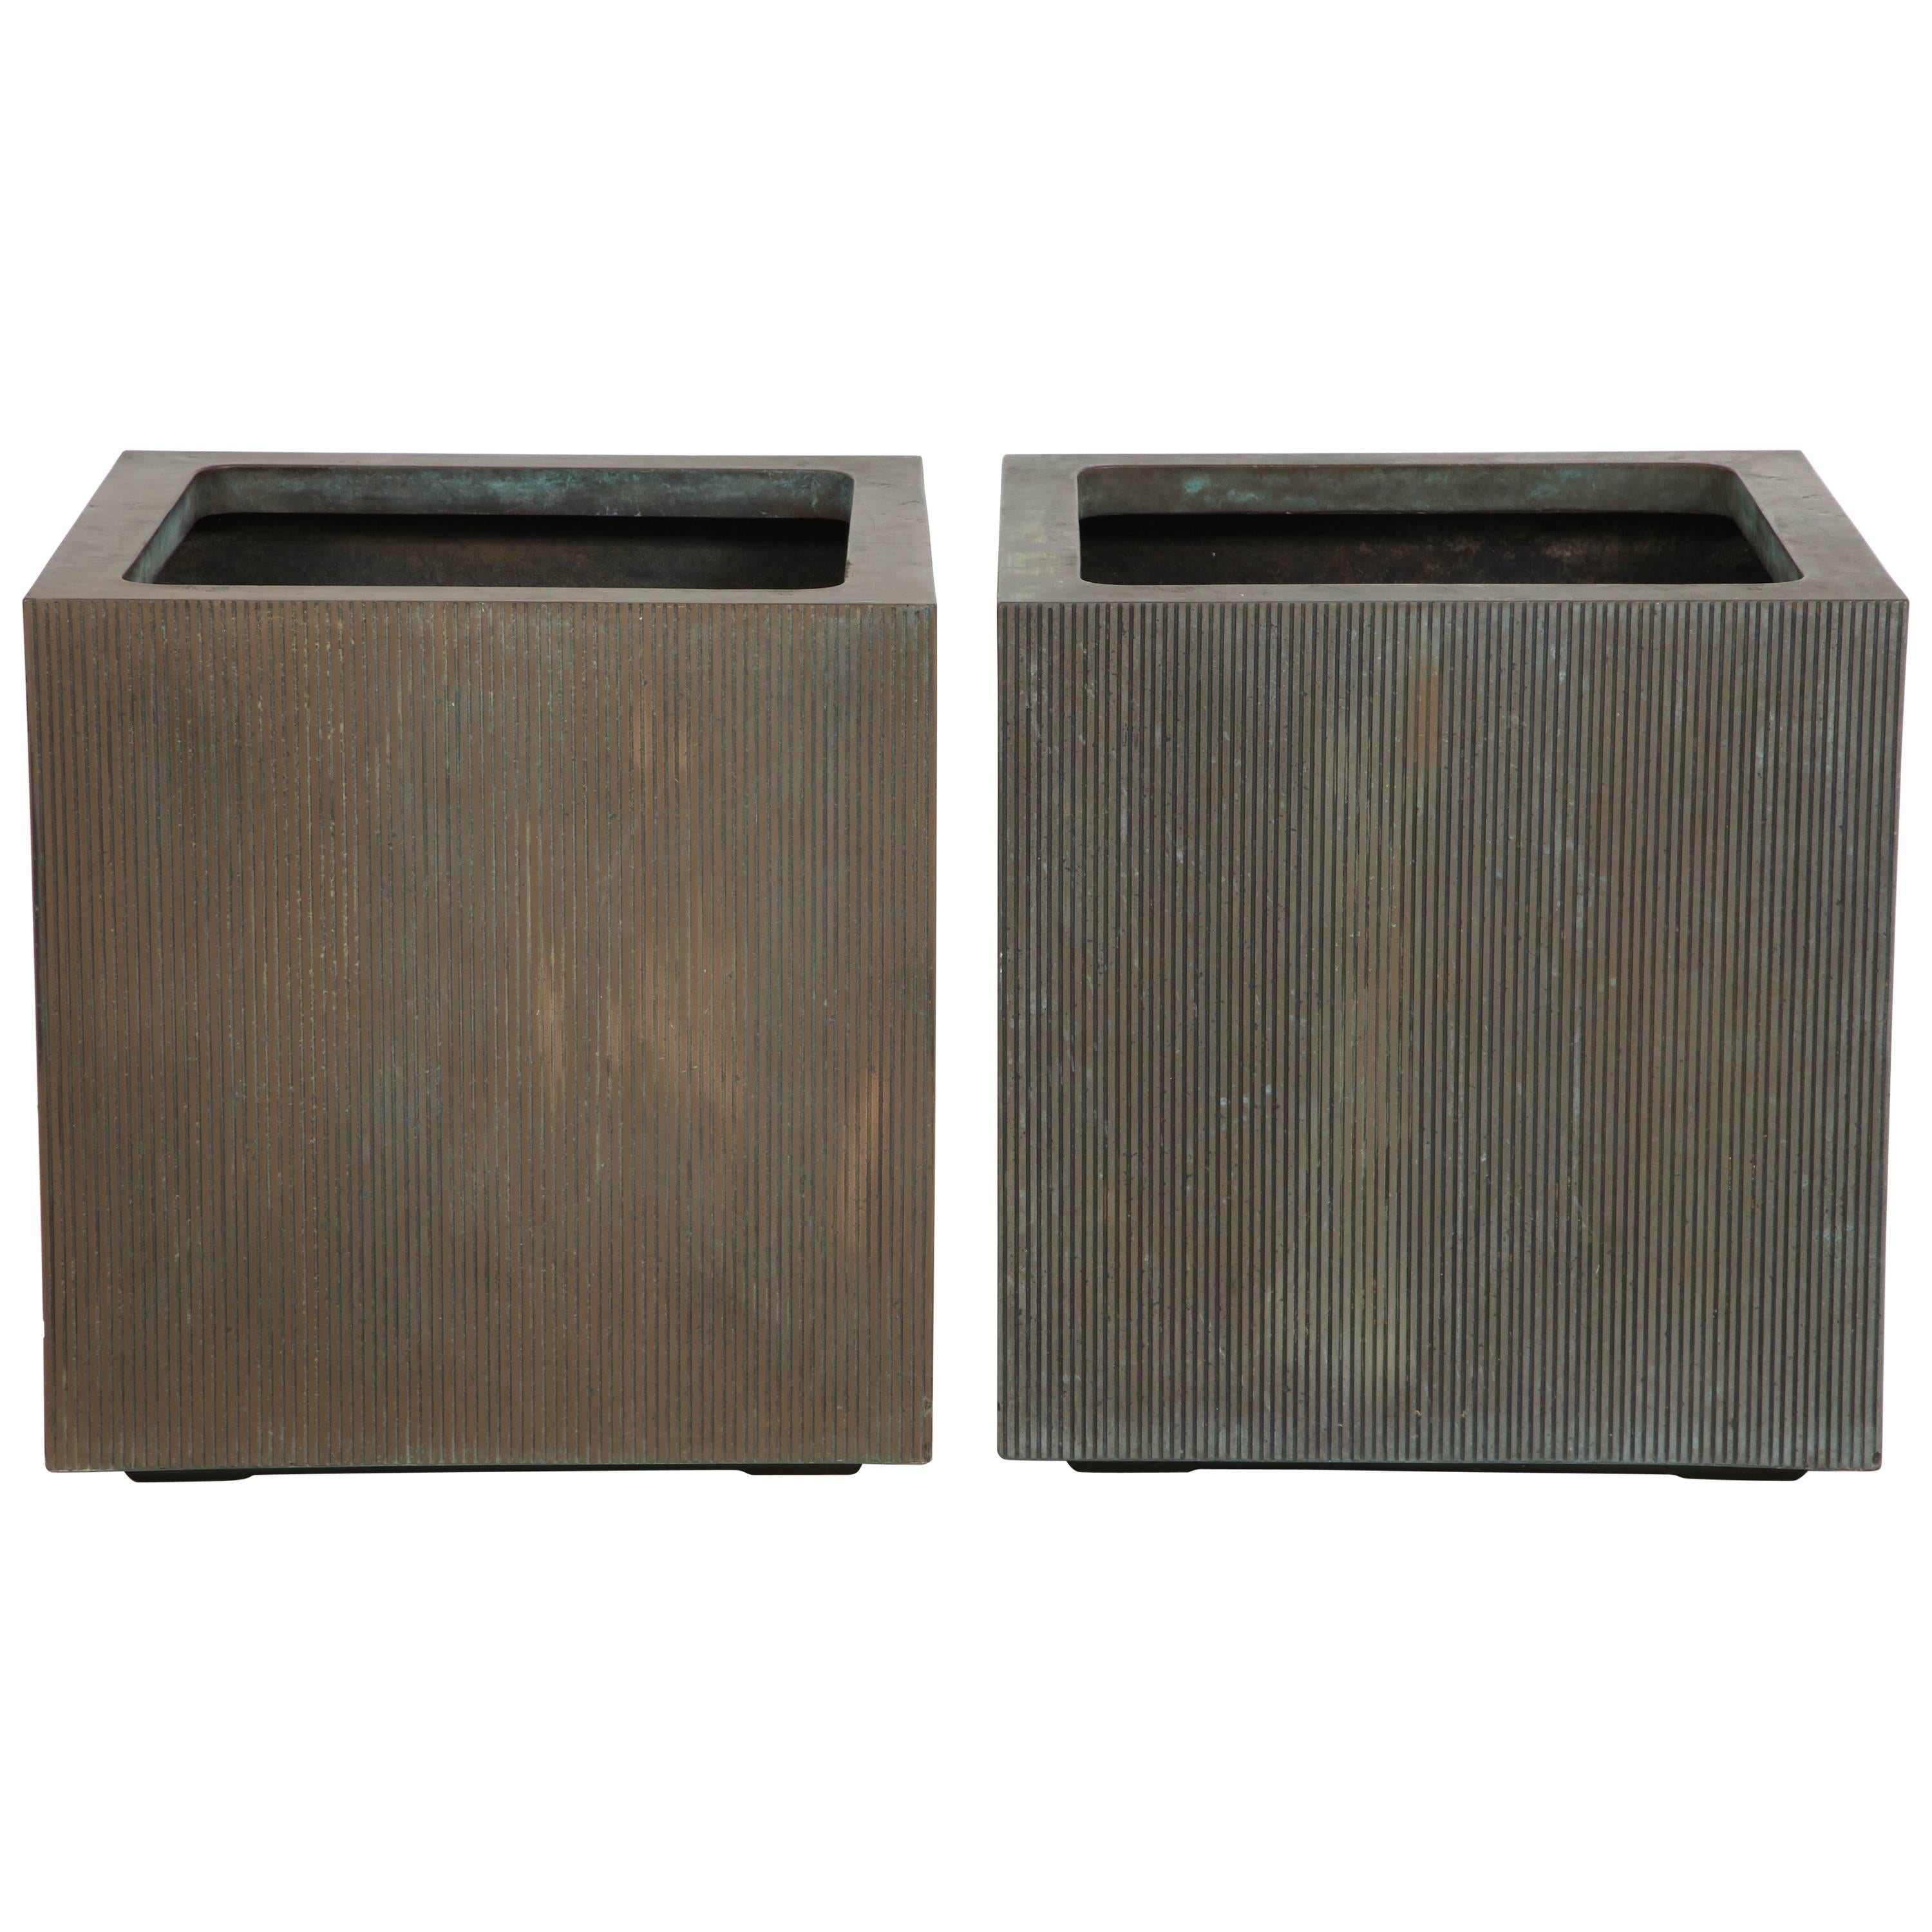 Exceptional Square Pair of Planters by Forms and Surfaces